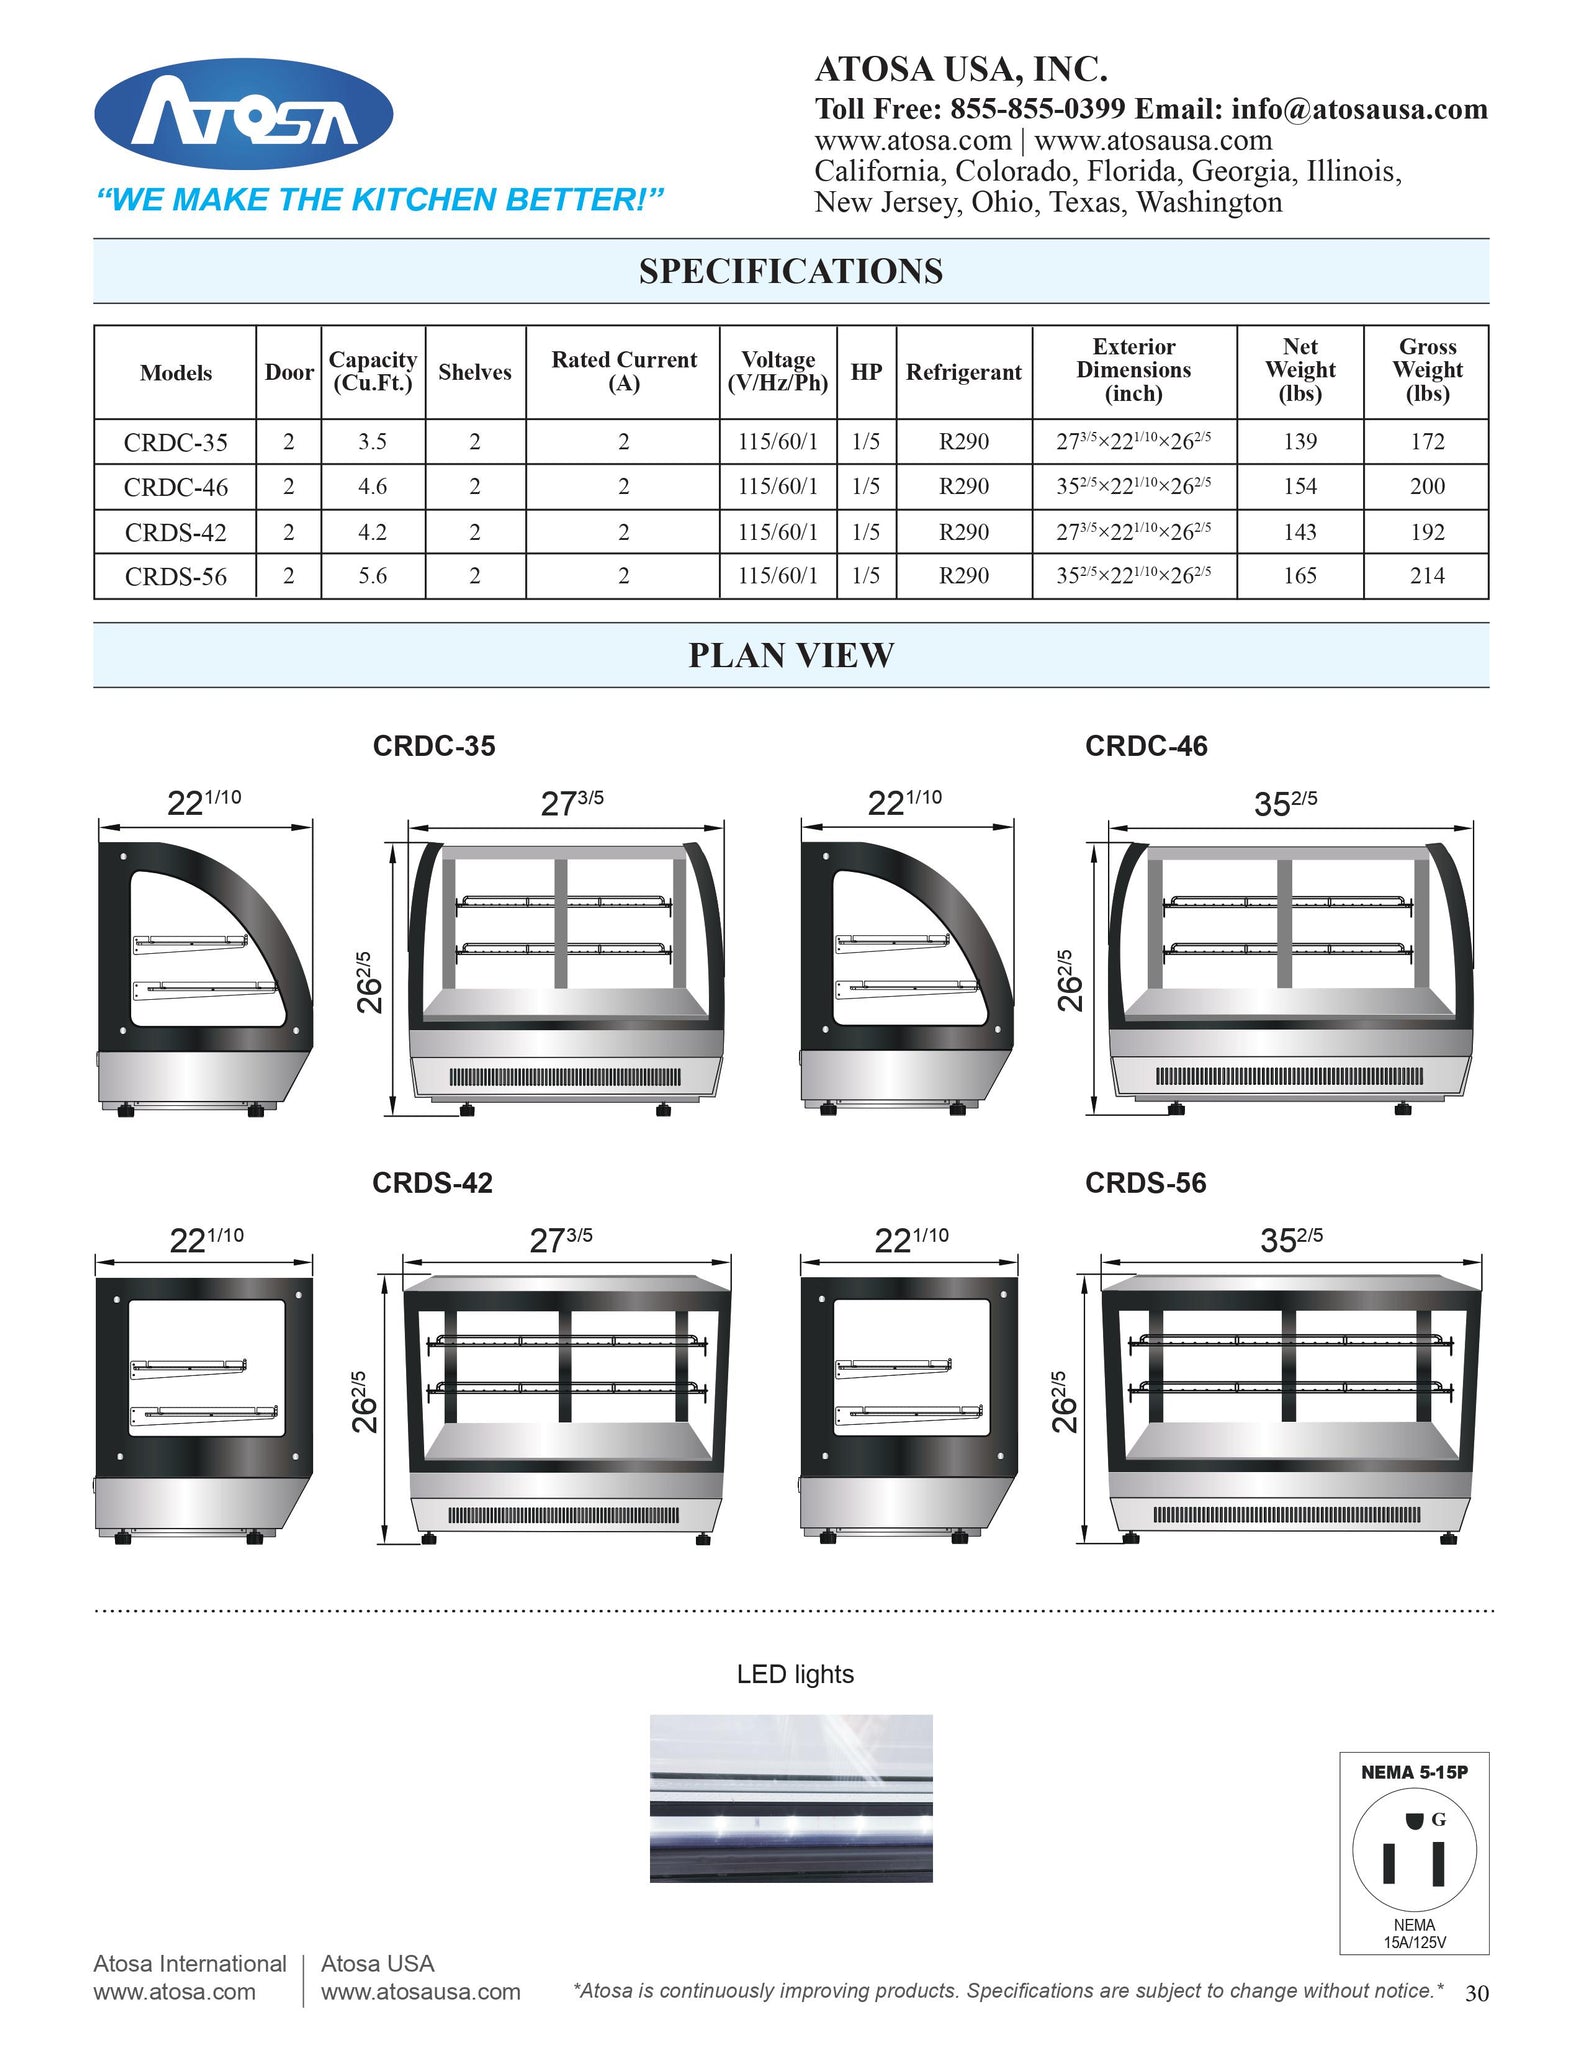 Atosa CRDS-56 35" Refrigerated Countertop Display Case